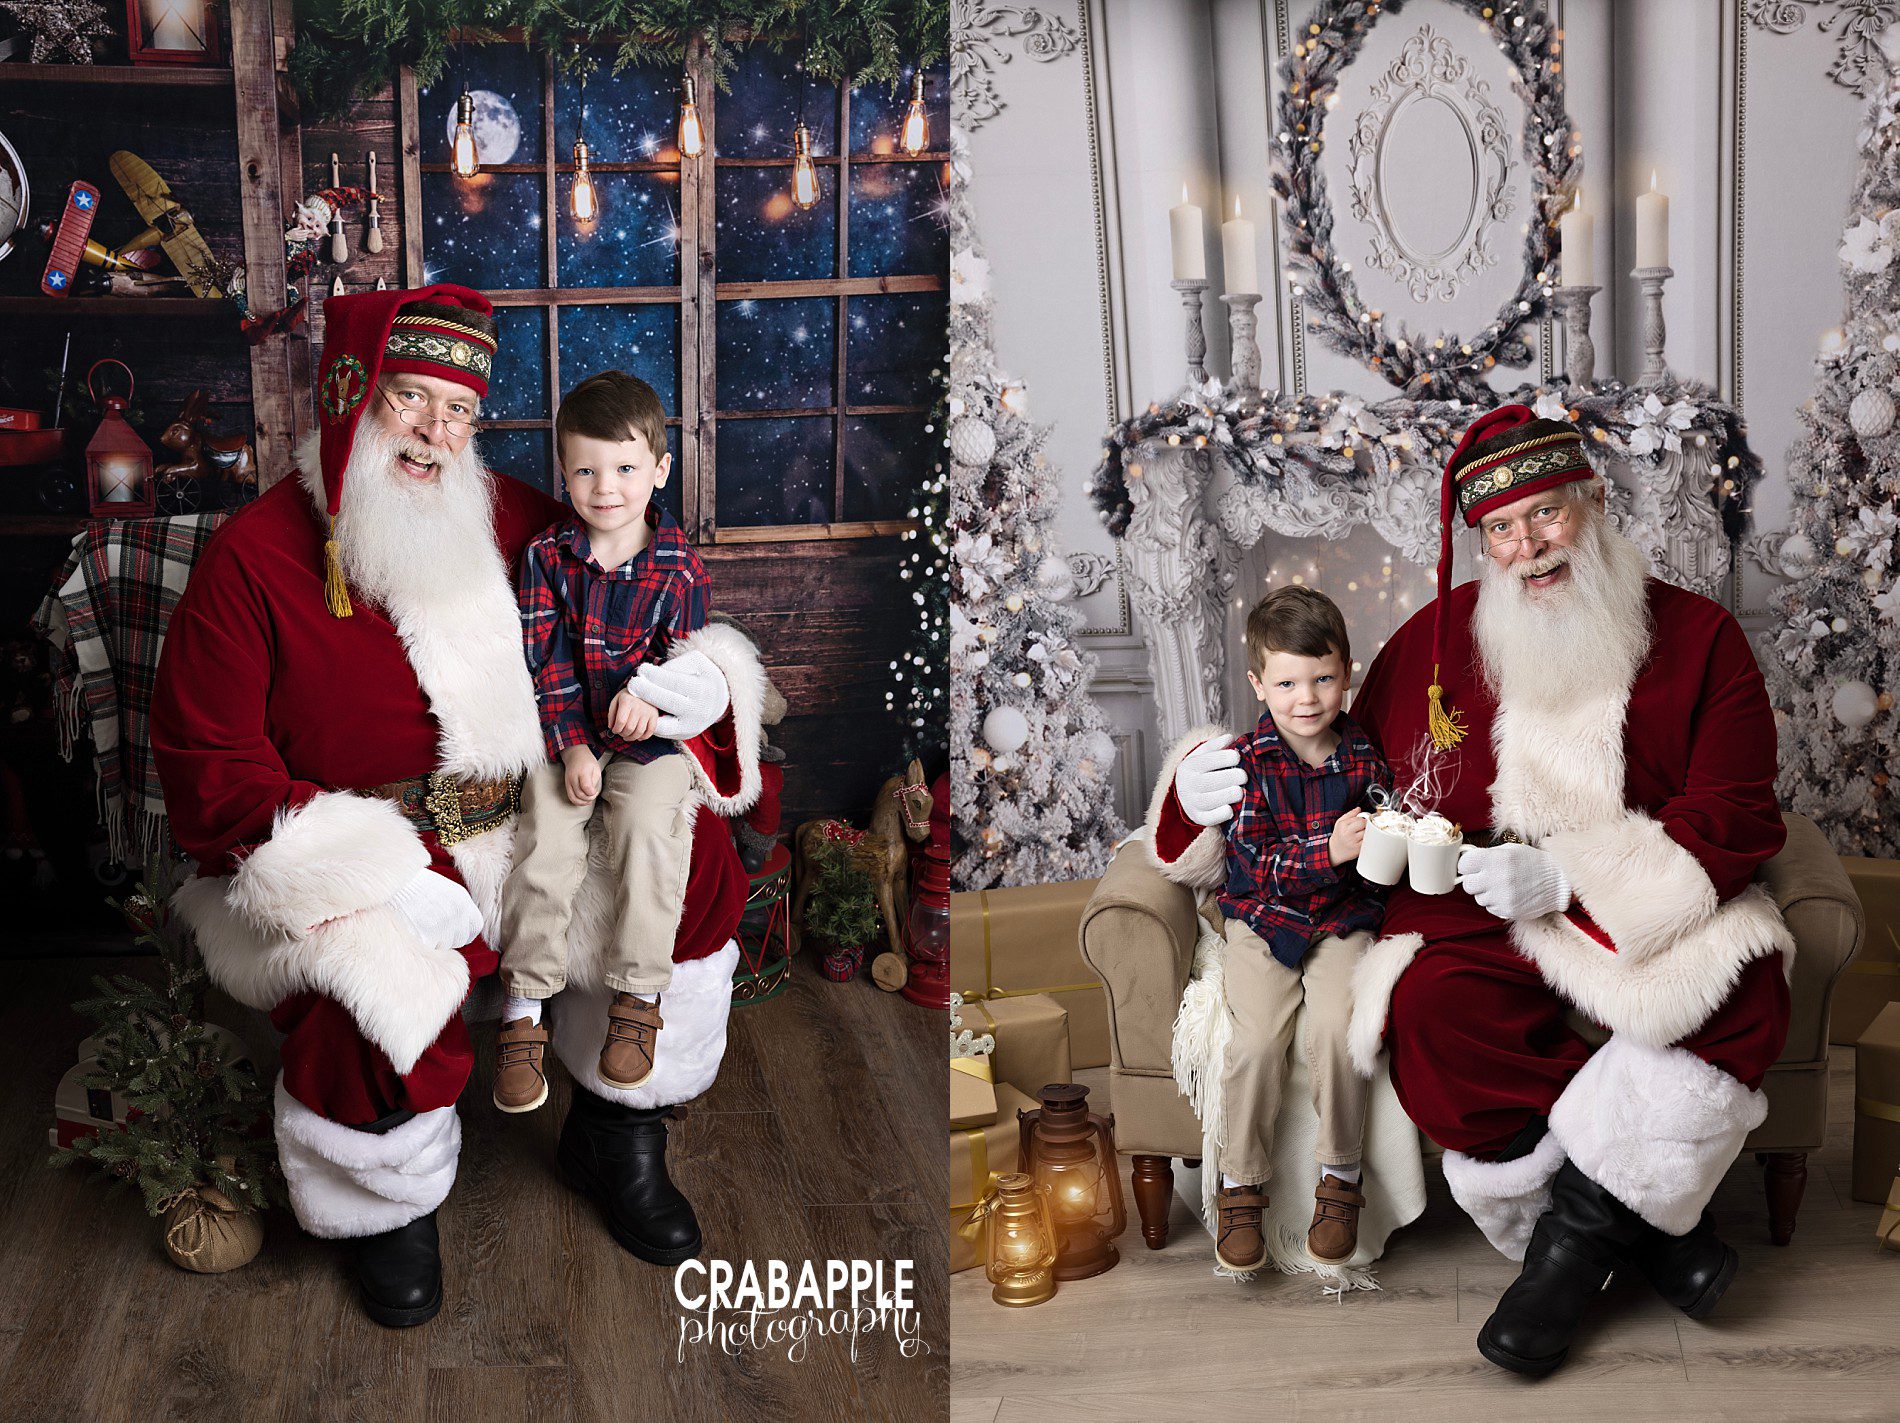 pose ideas with santa for professional portraits